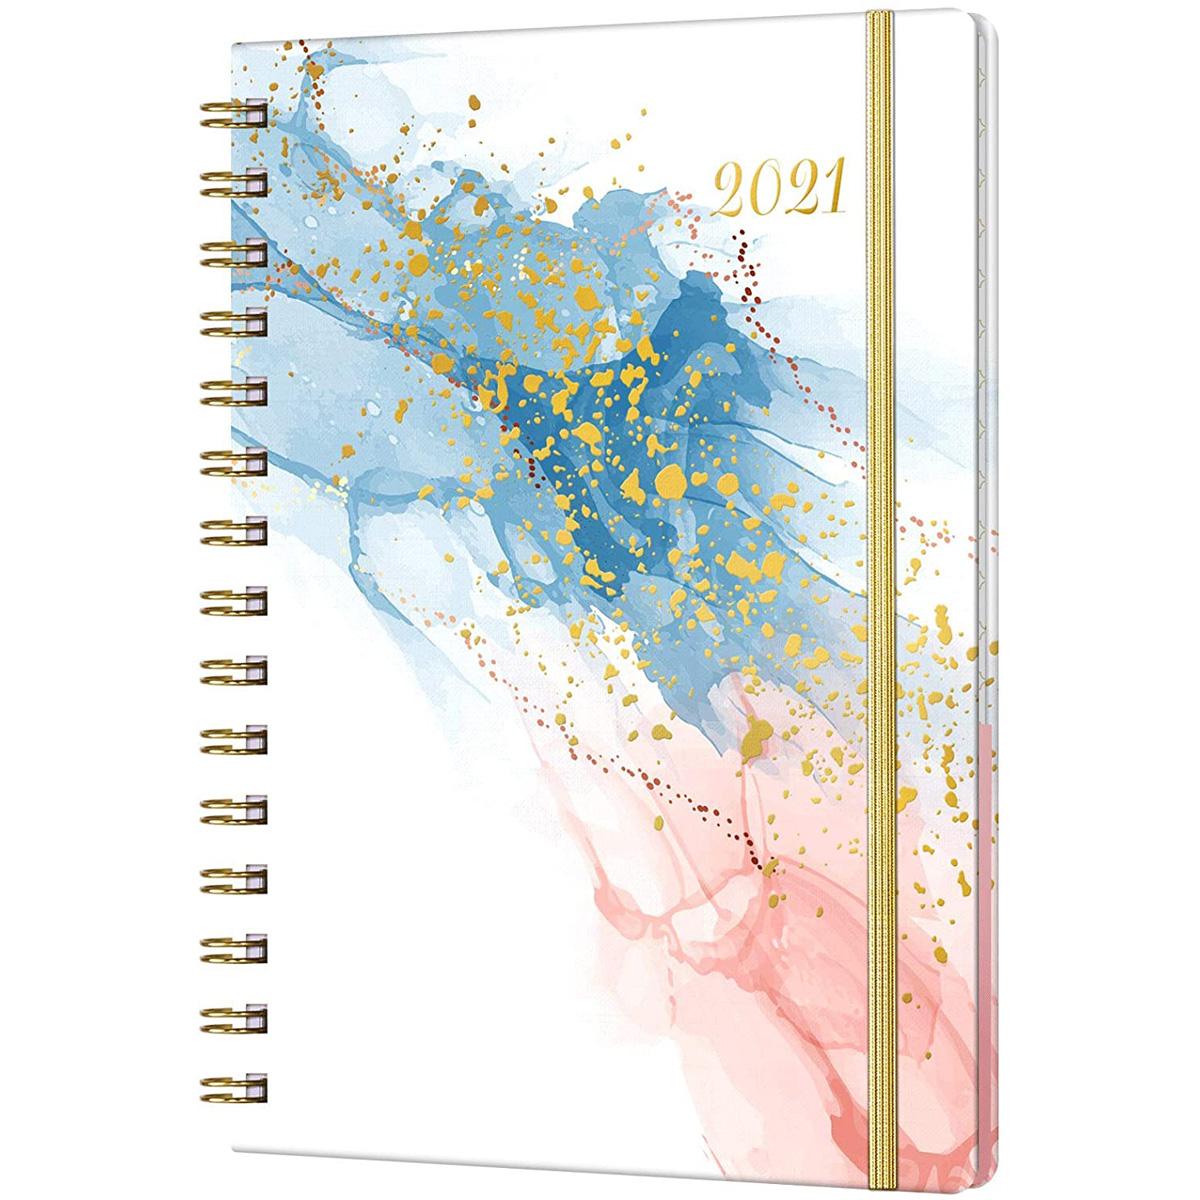 2021 Monthly Weekly Planner for $3.95